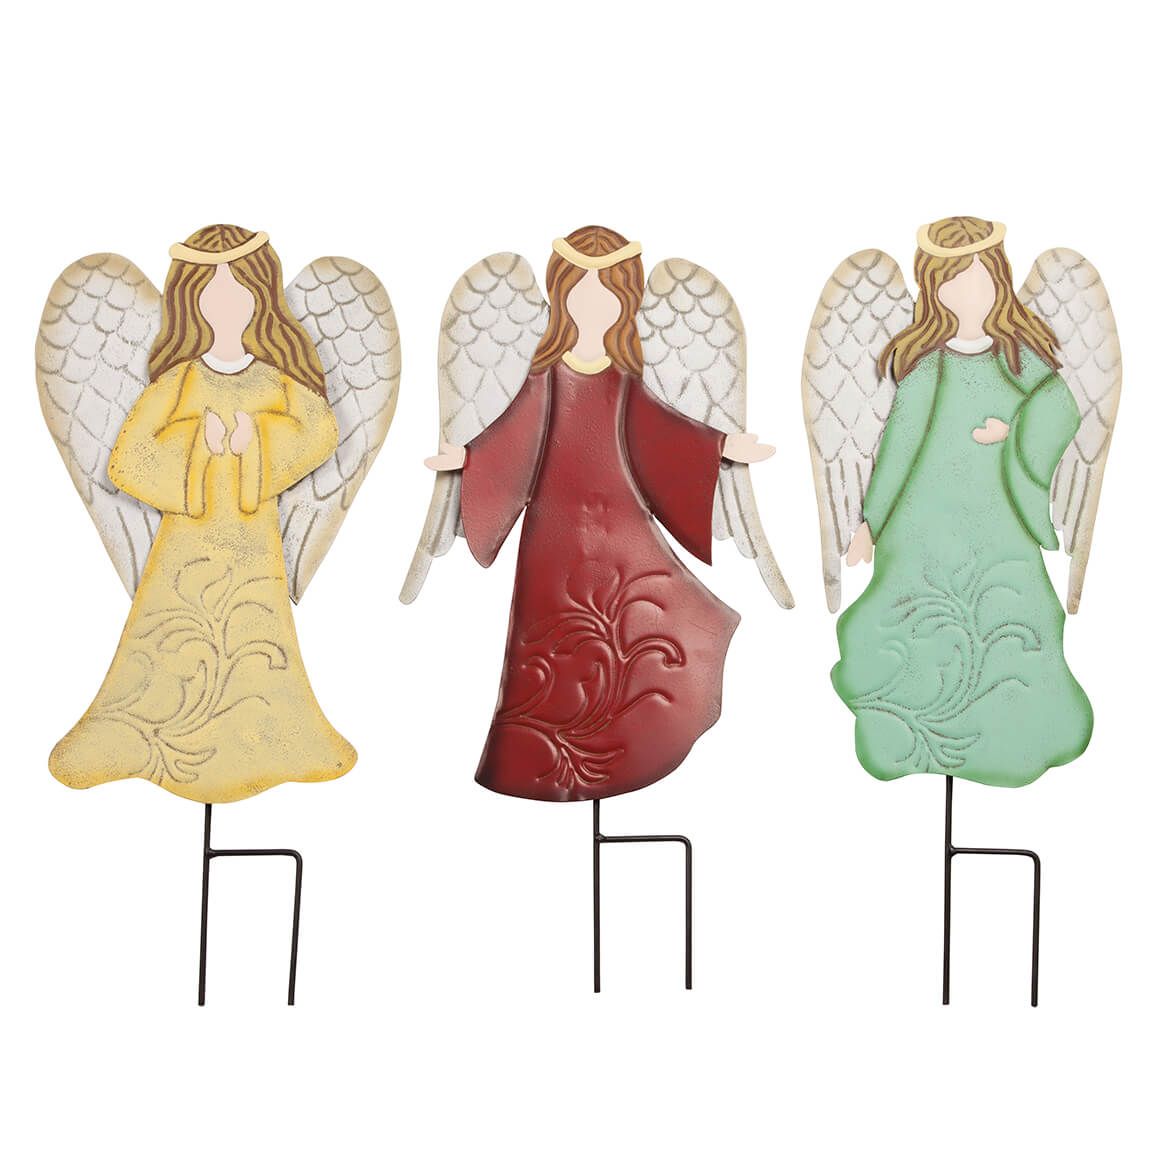 Metal Angel Stakes by Fox River™ Creations, Set of 3 + '-' + 364680